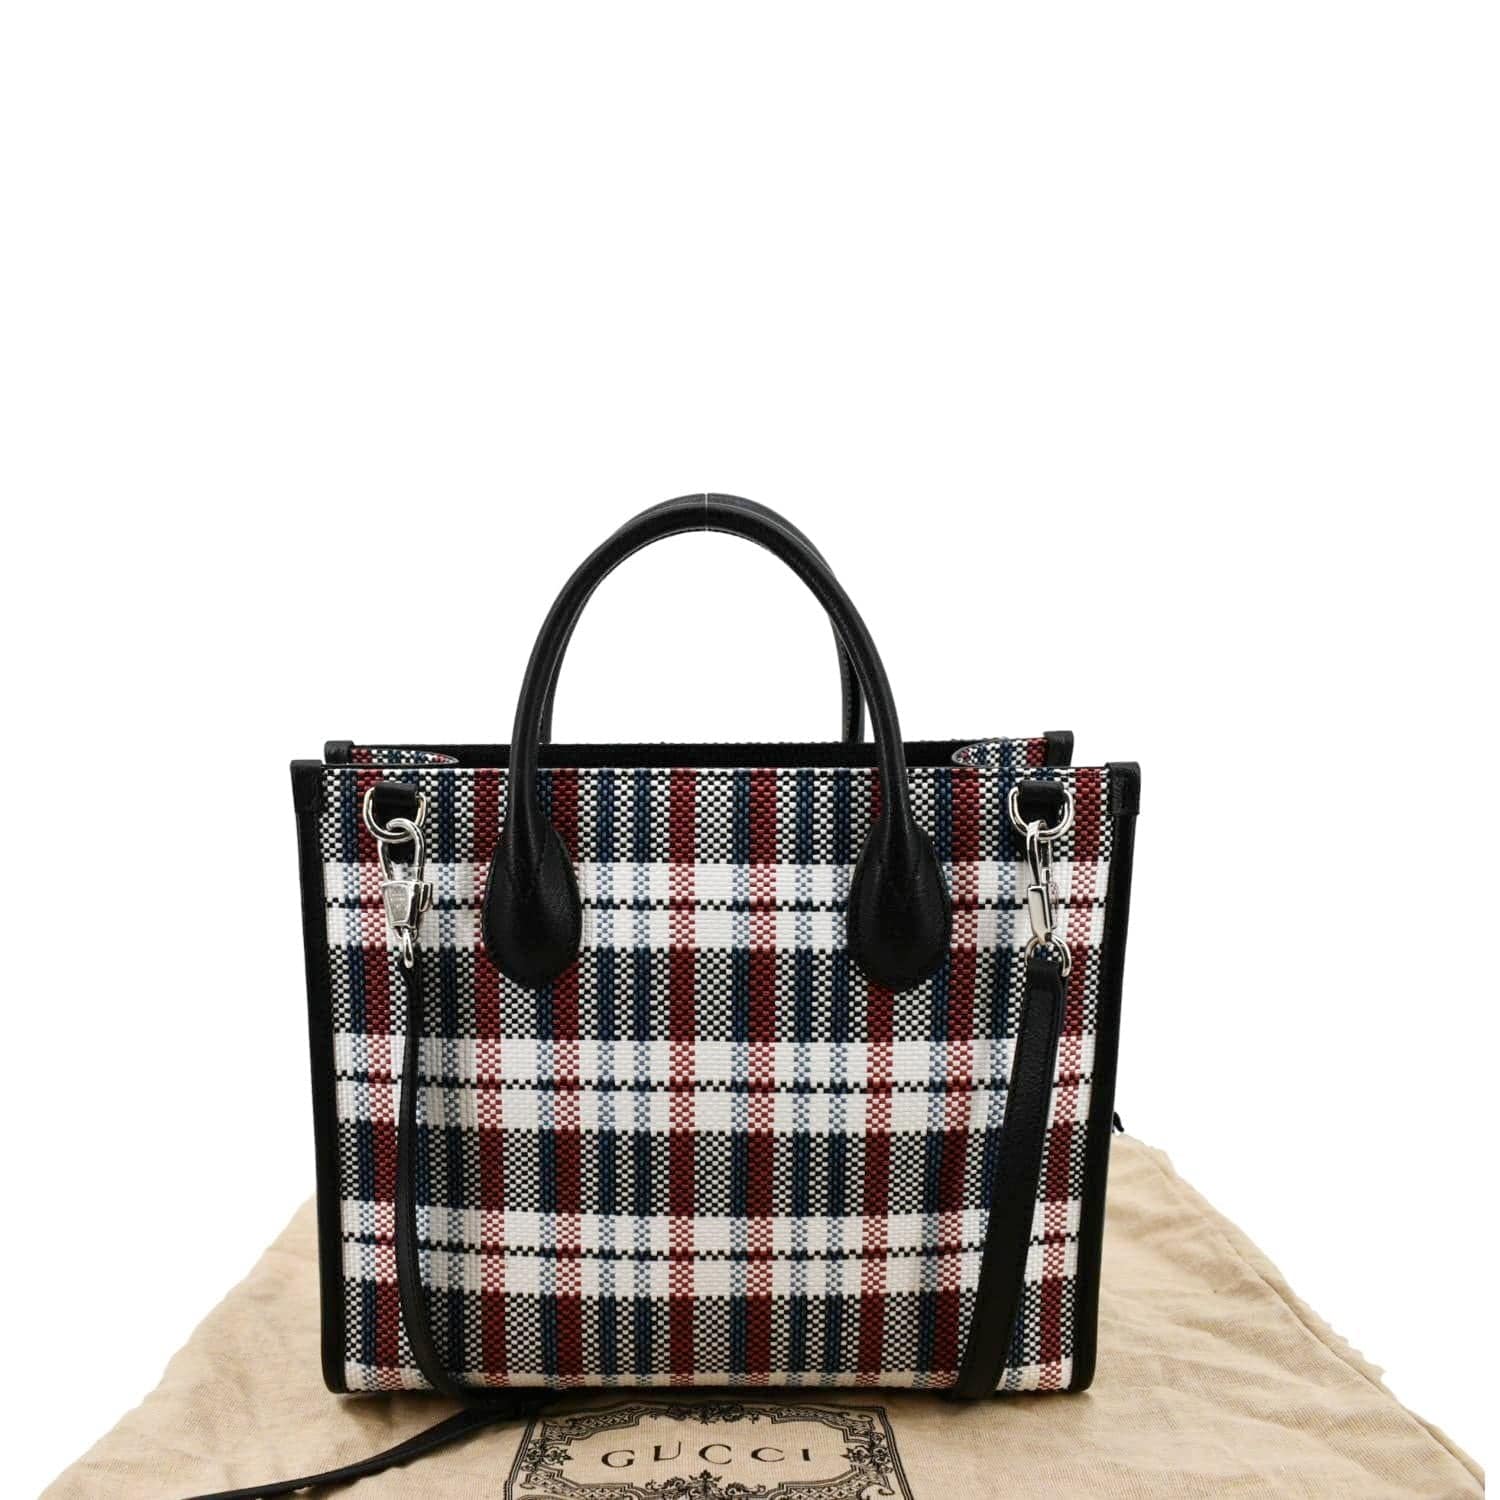 Gucci Plaid Bags & Handbags for Women, Authenticity Guaranteed